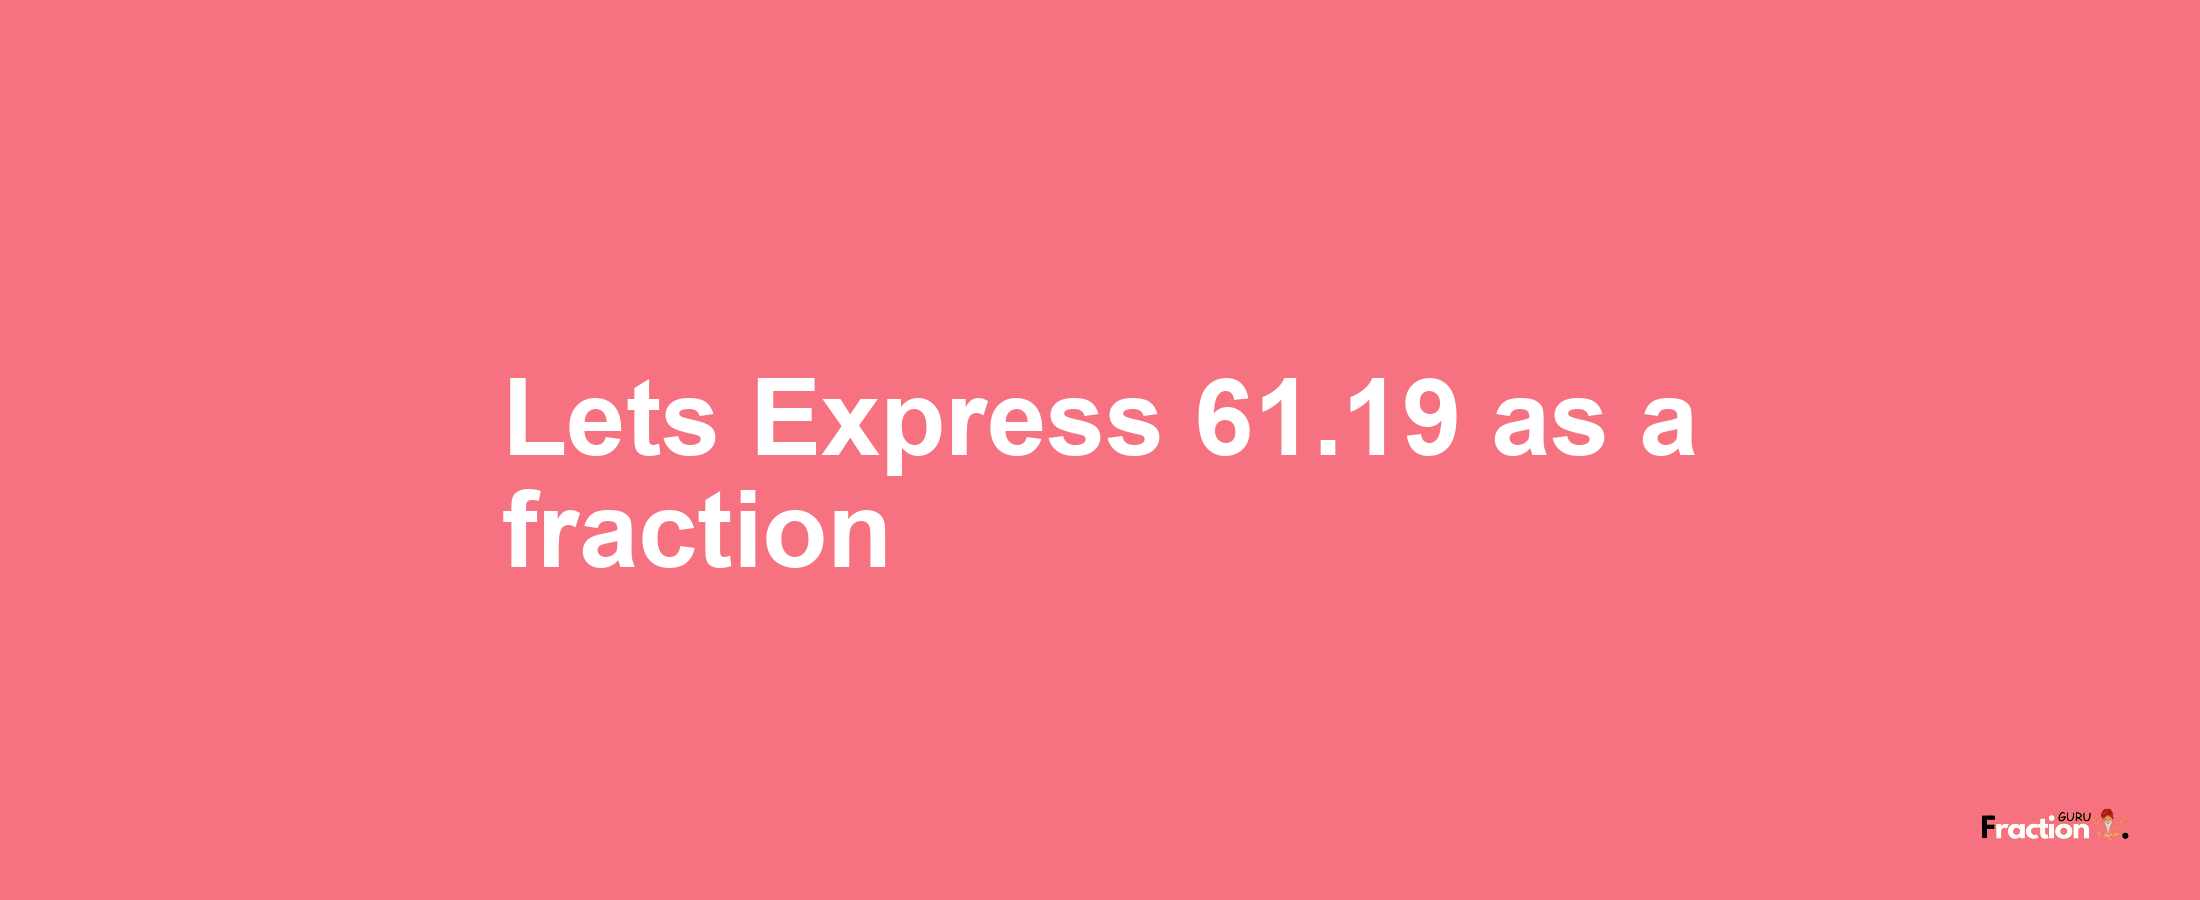 Lets Express 61.19 as afraction